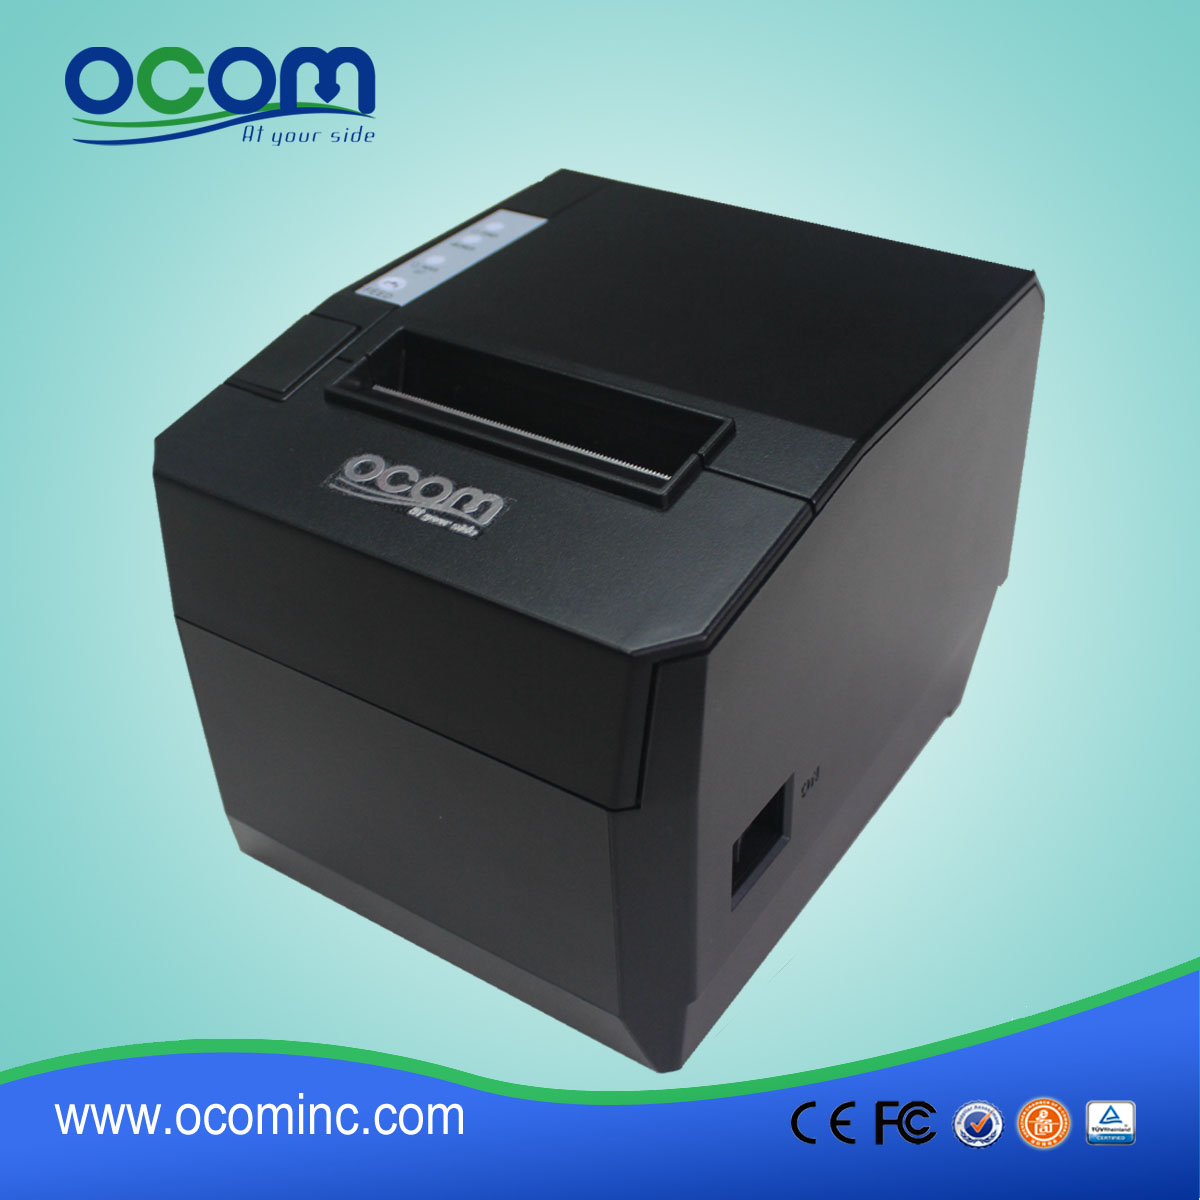 OCPP-88A Point of Sale 3 inch Thermal Head Printer